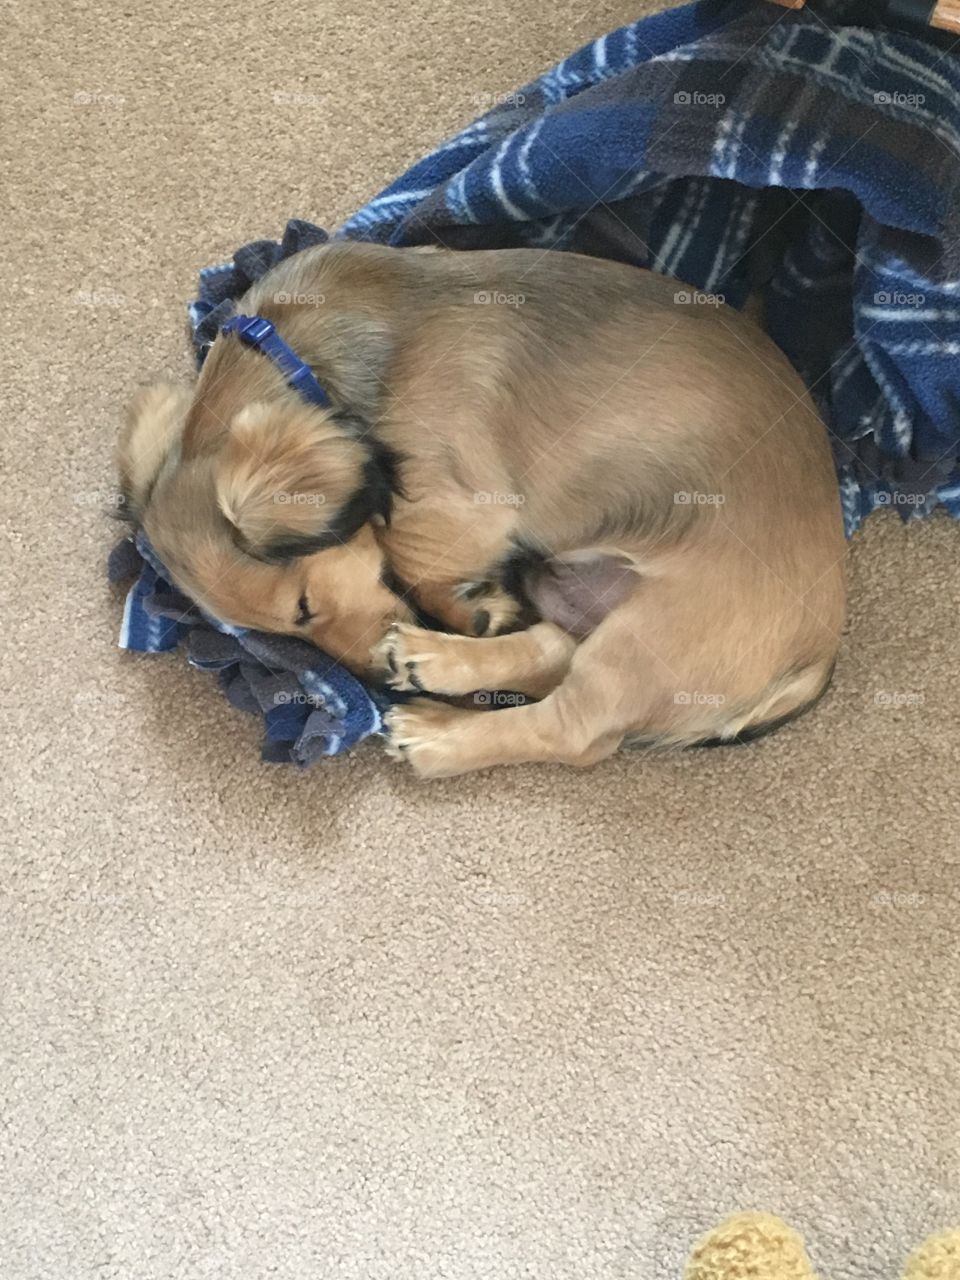 Sleepy puppy with back foot on nose